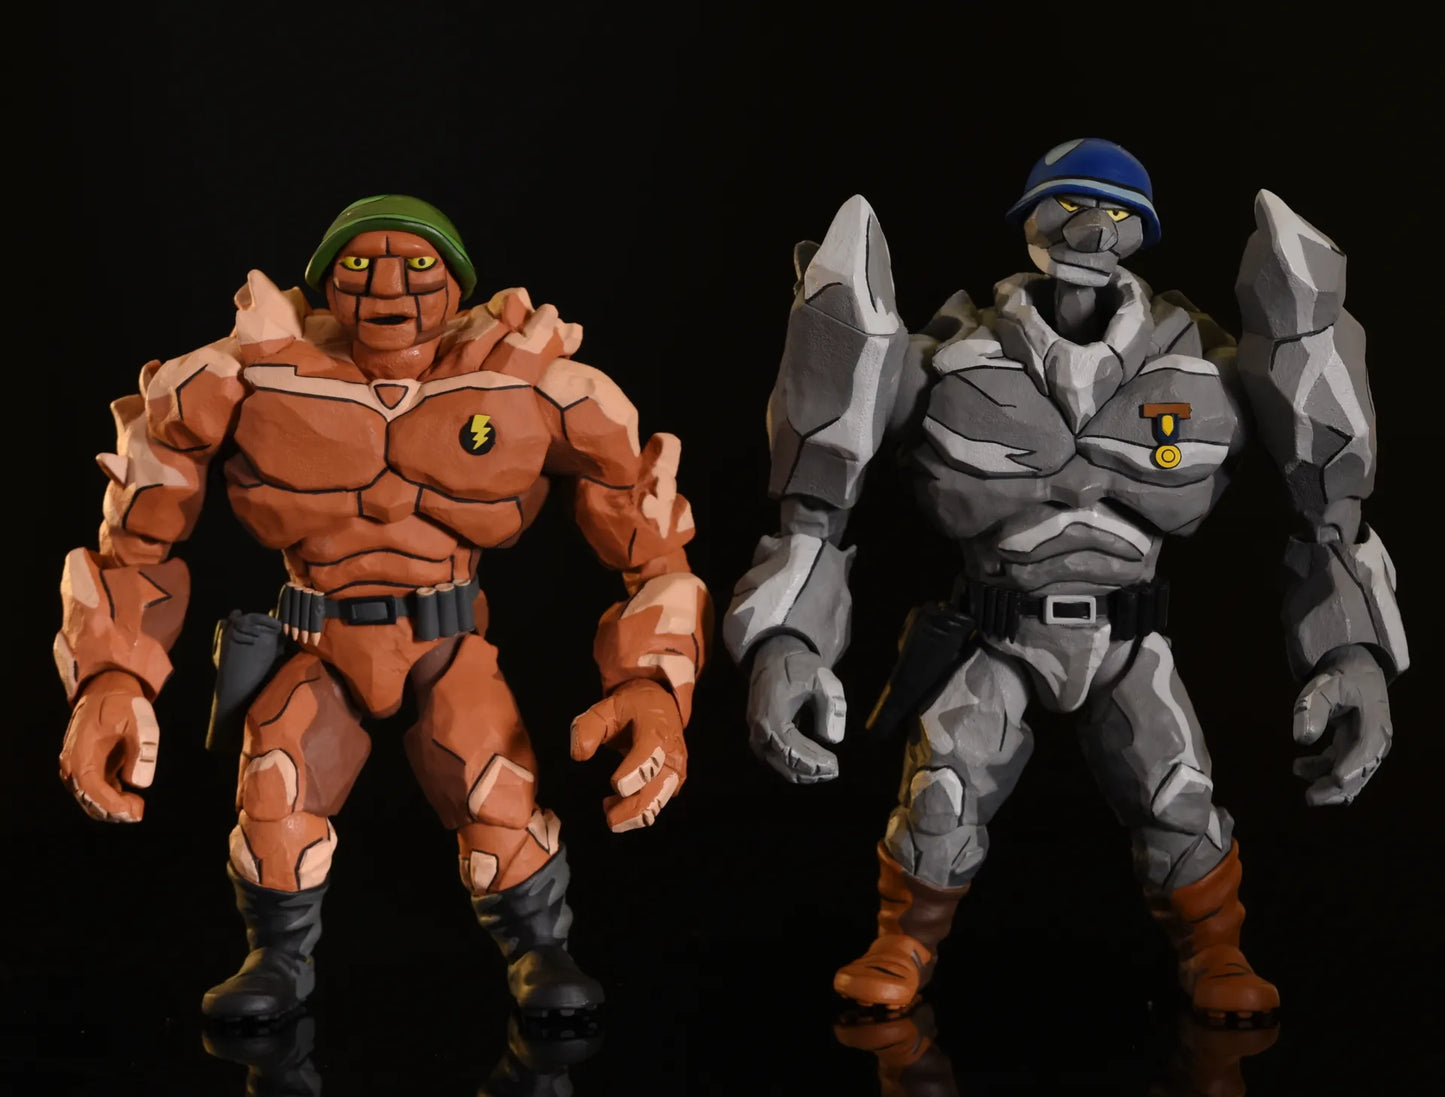 TMNT Traag and Granitor Action Figure 2-Pack